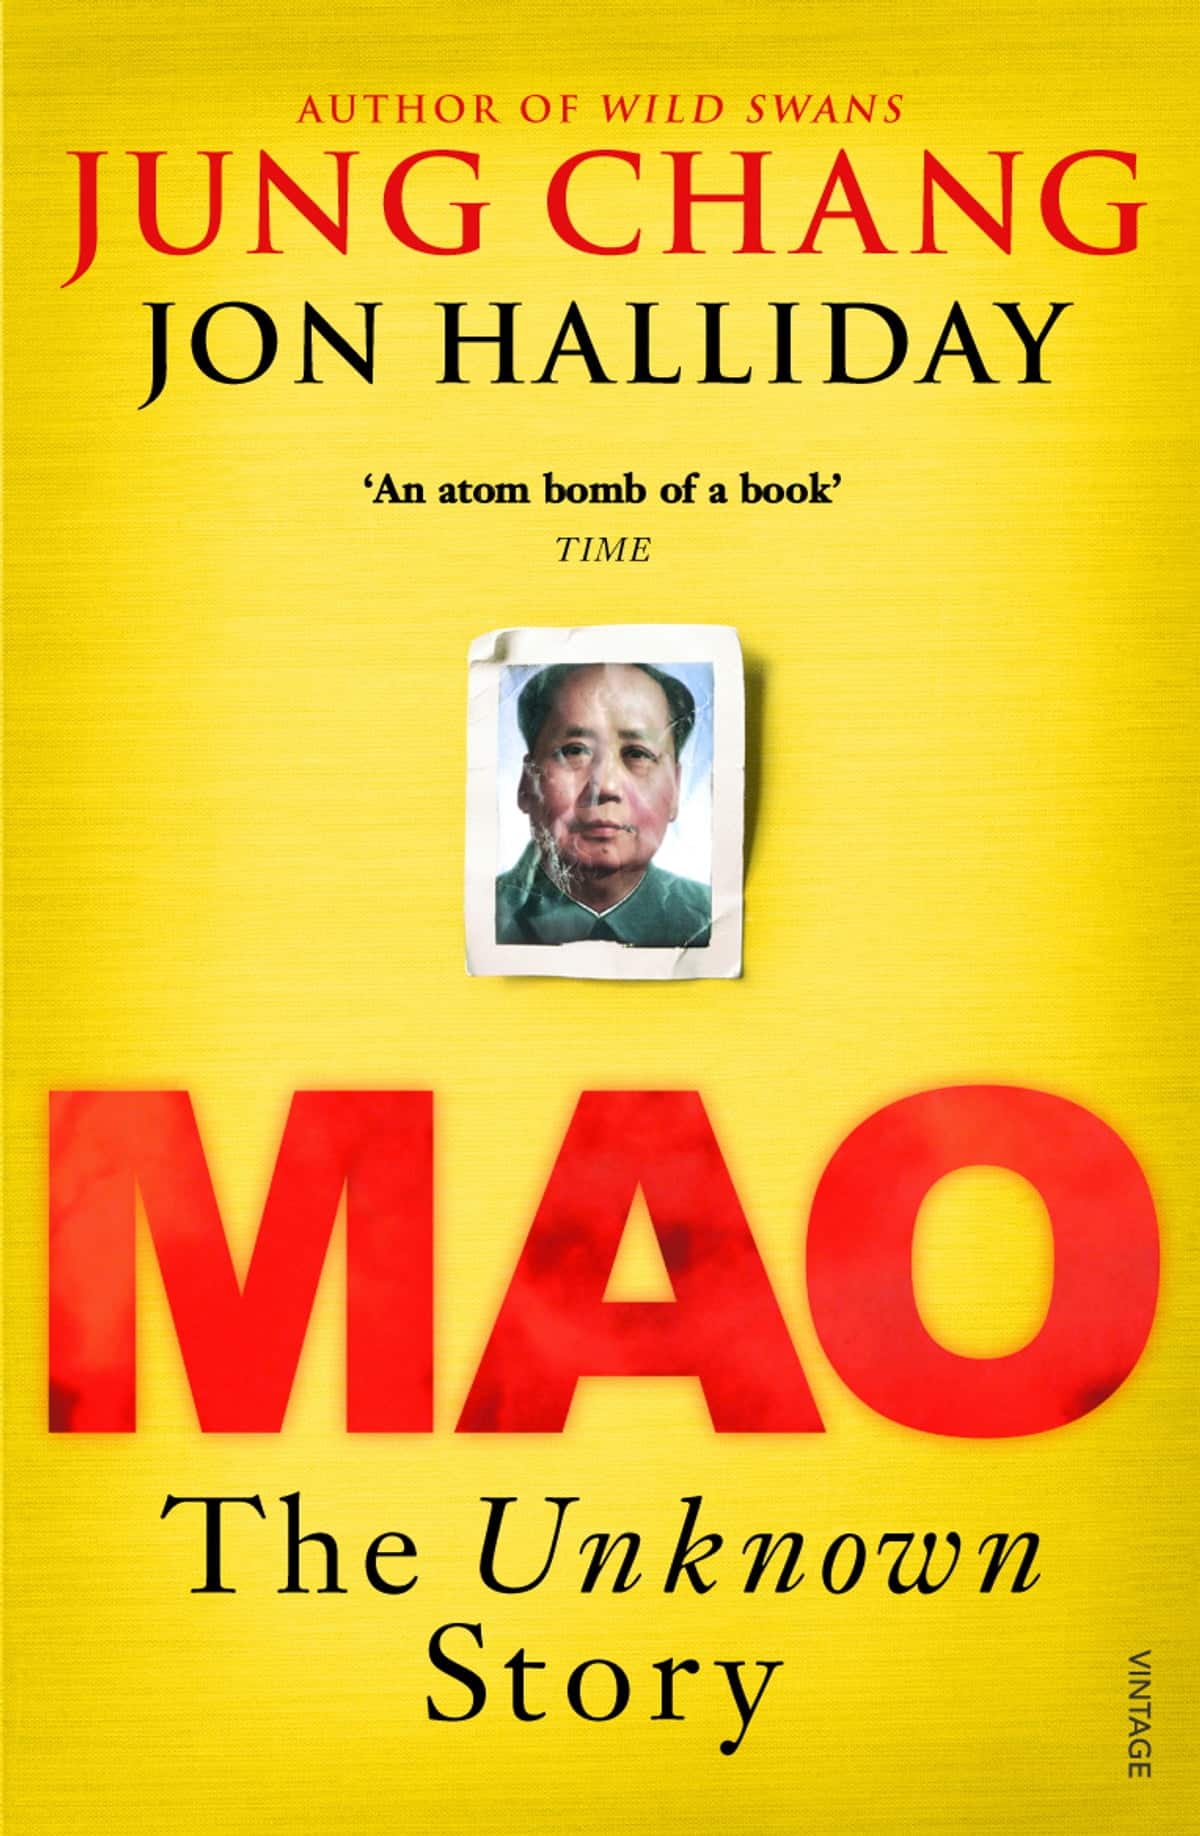 Mao – The Unknown Story by Jung Chang